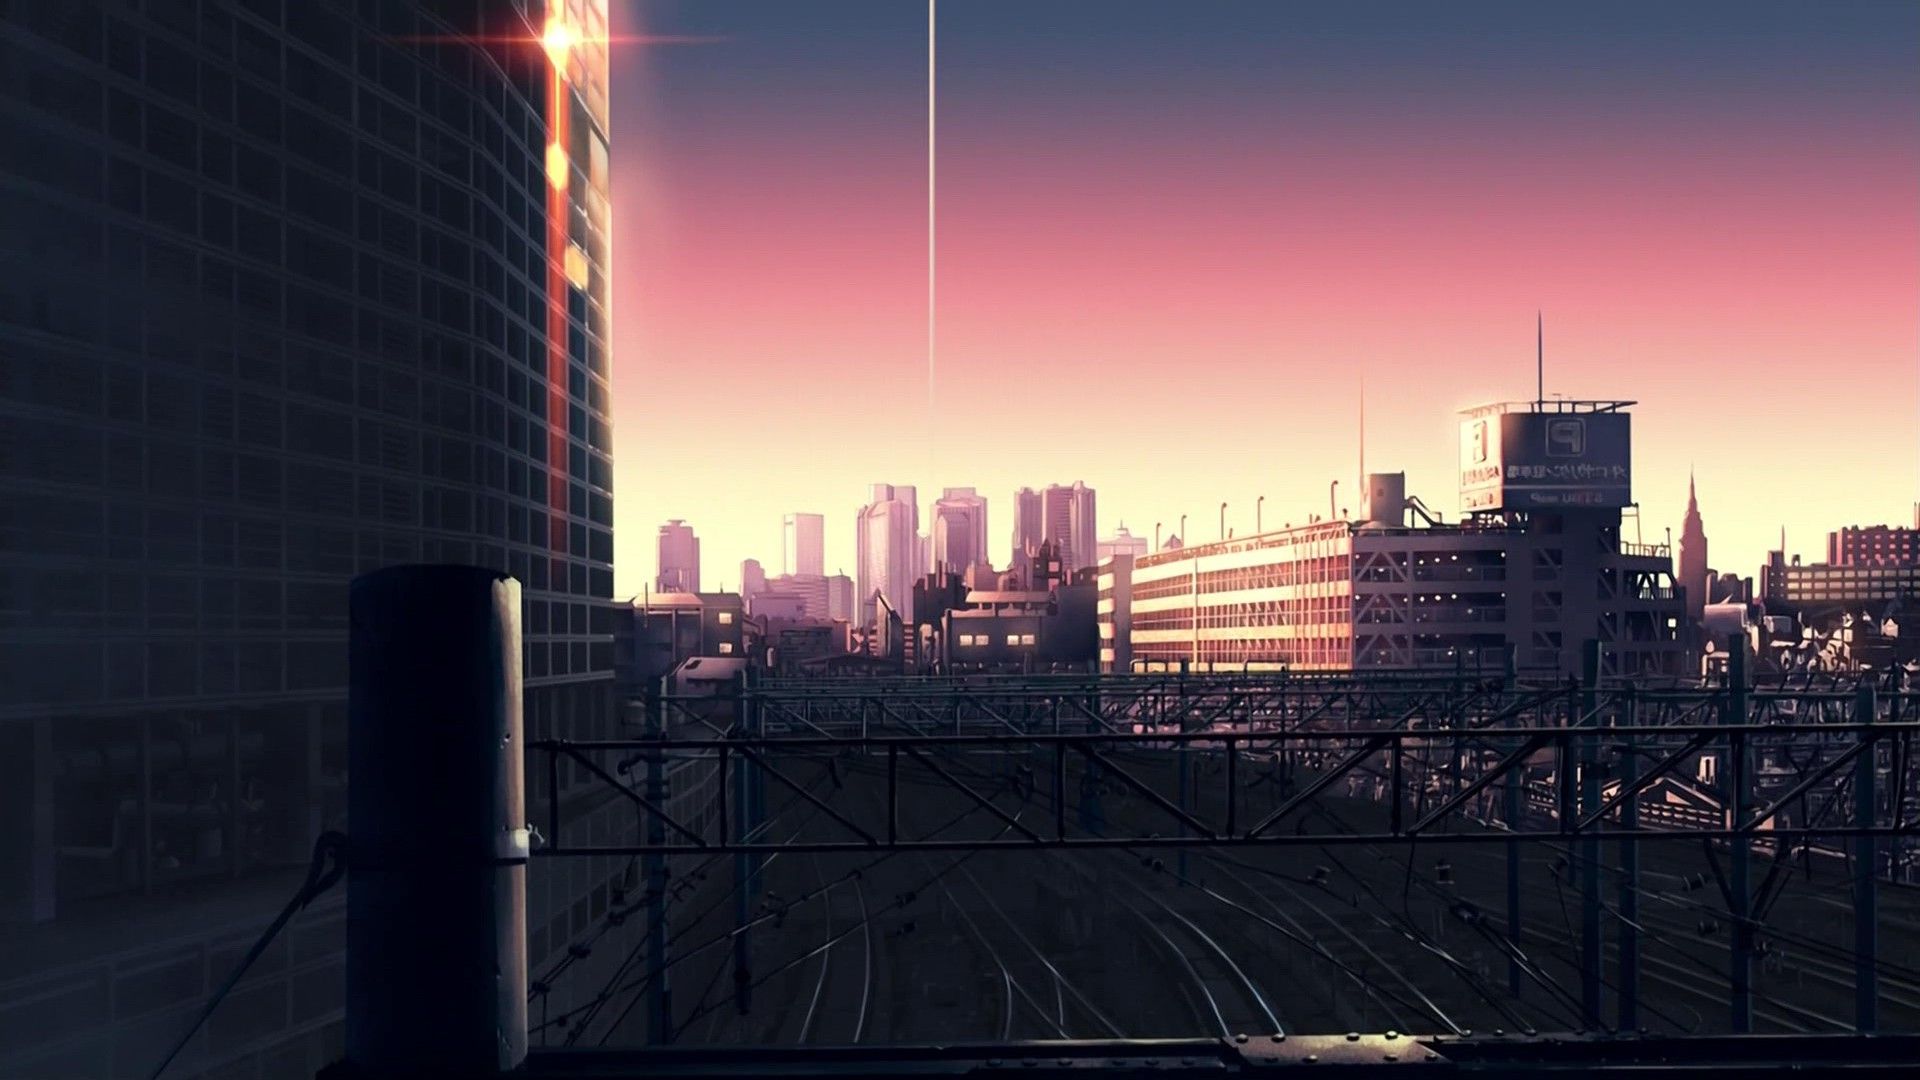 Aesthetic anime city wallpaper 1920x1080 for android 4.0 - Anime sunset